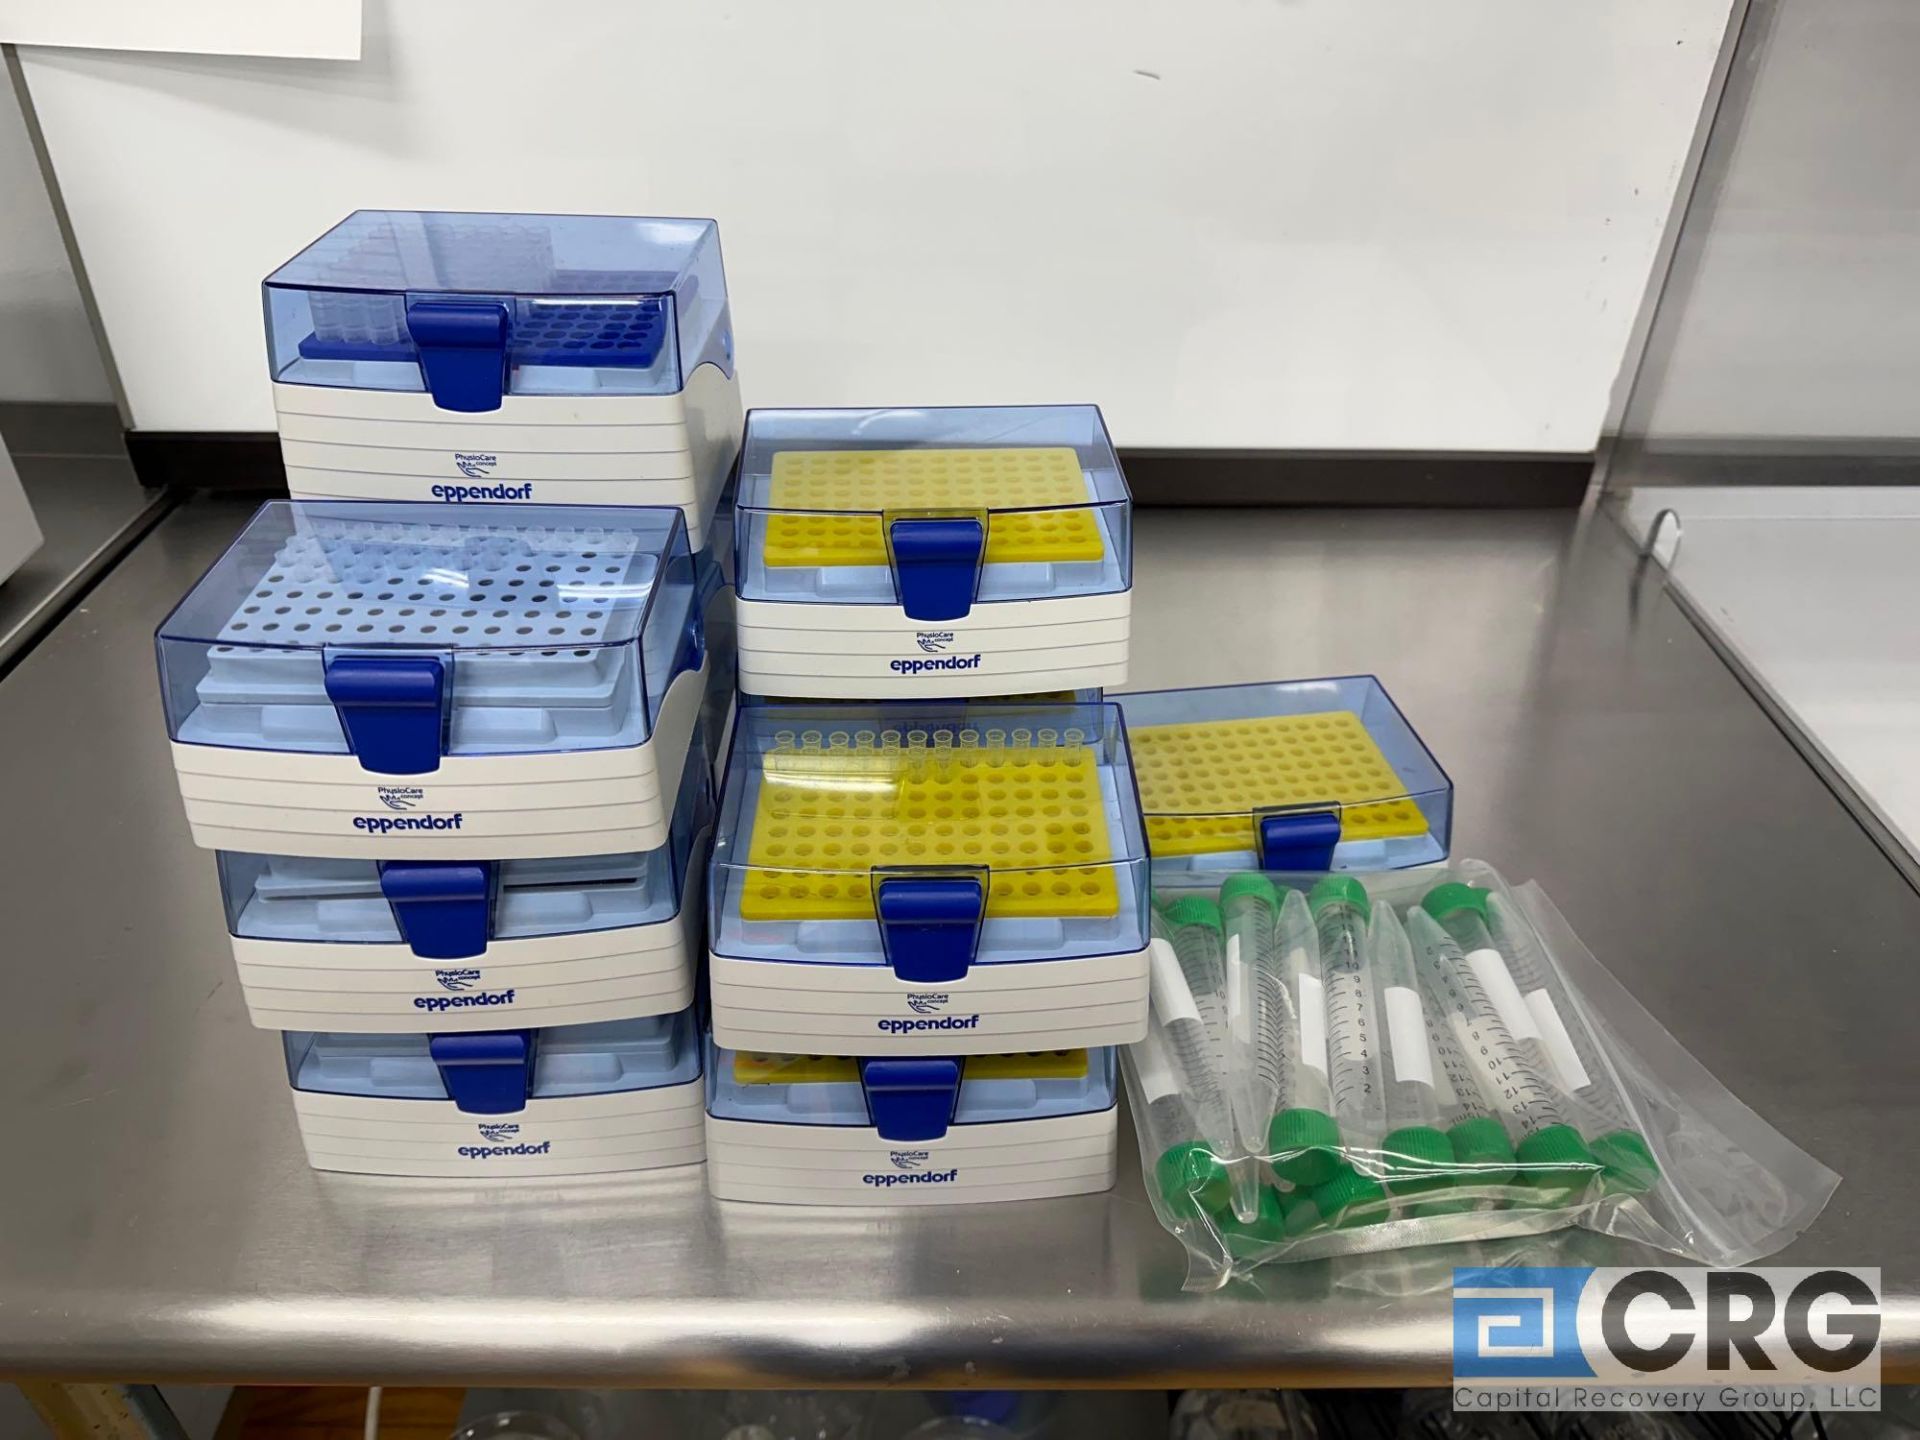 Ass't Eppendorf and McKesson Lab Supplies - Image 6 of 6